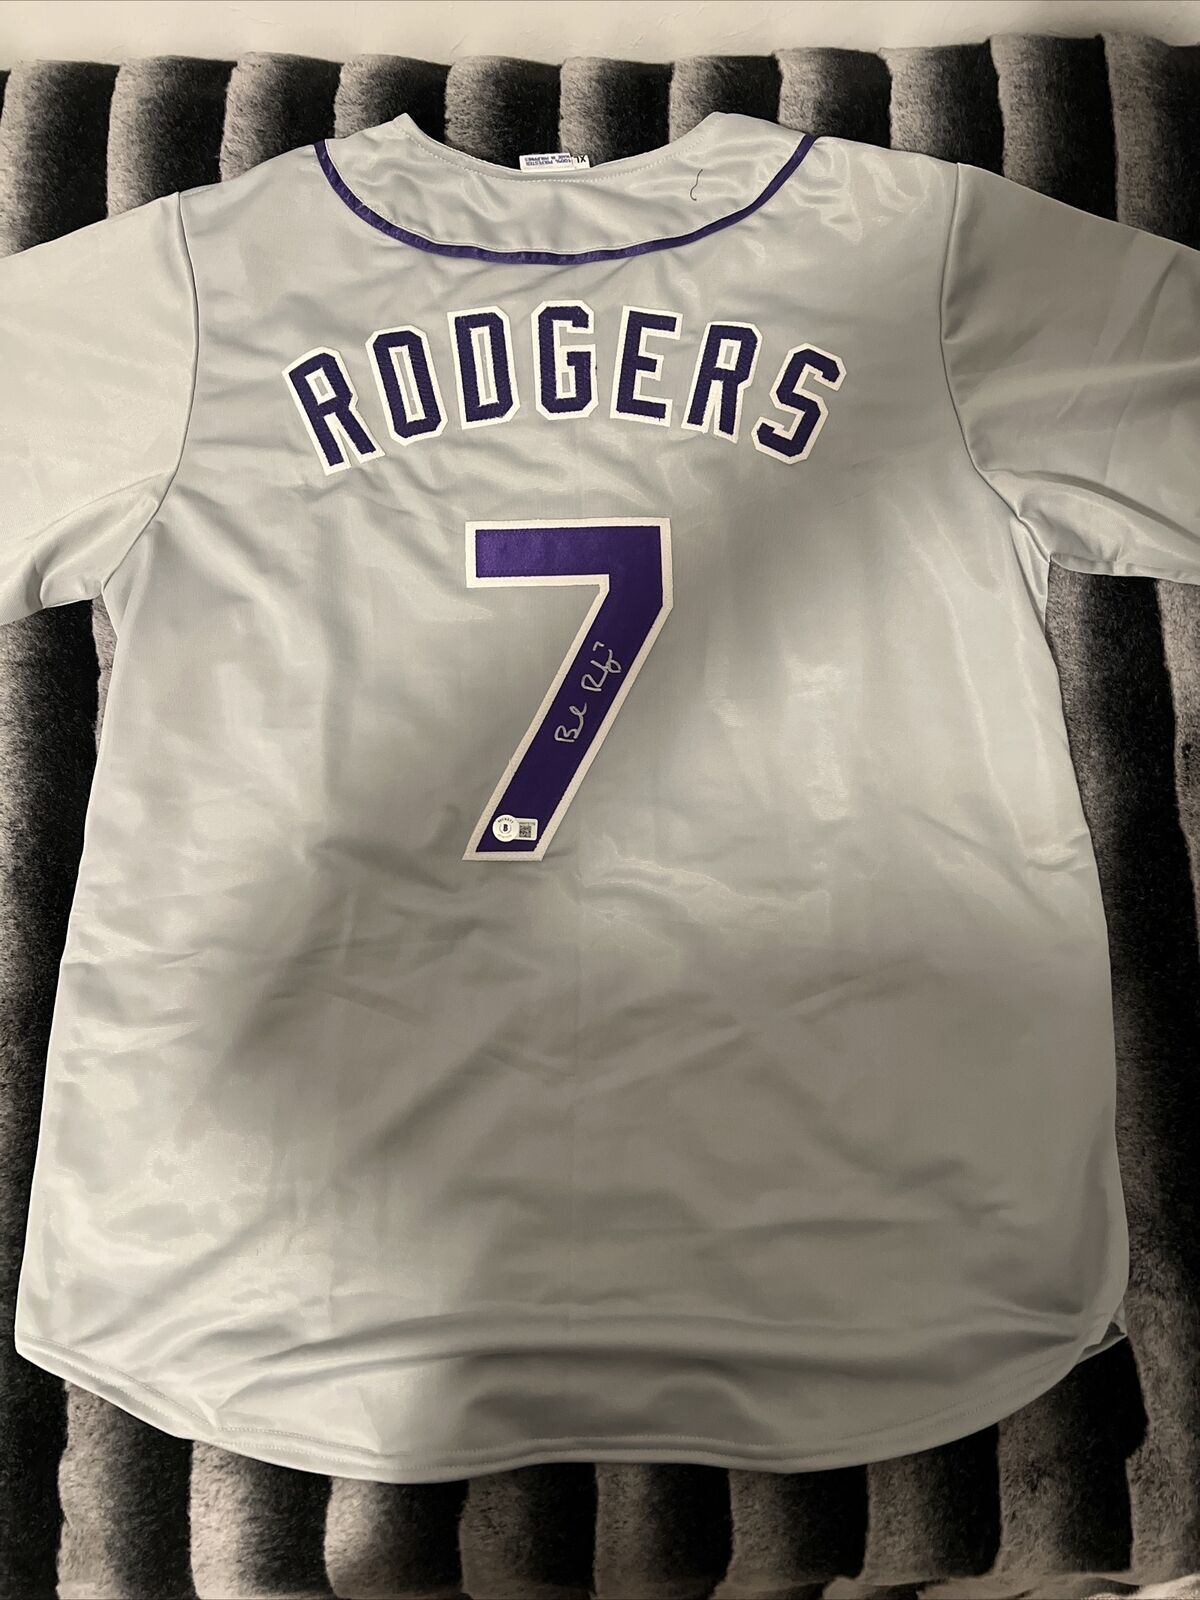 Brendan Rodgers Autographed Jersey Colorado Rockies Adult BECKETT Authenticated